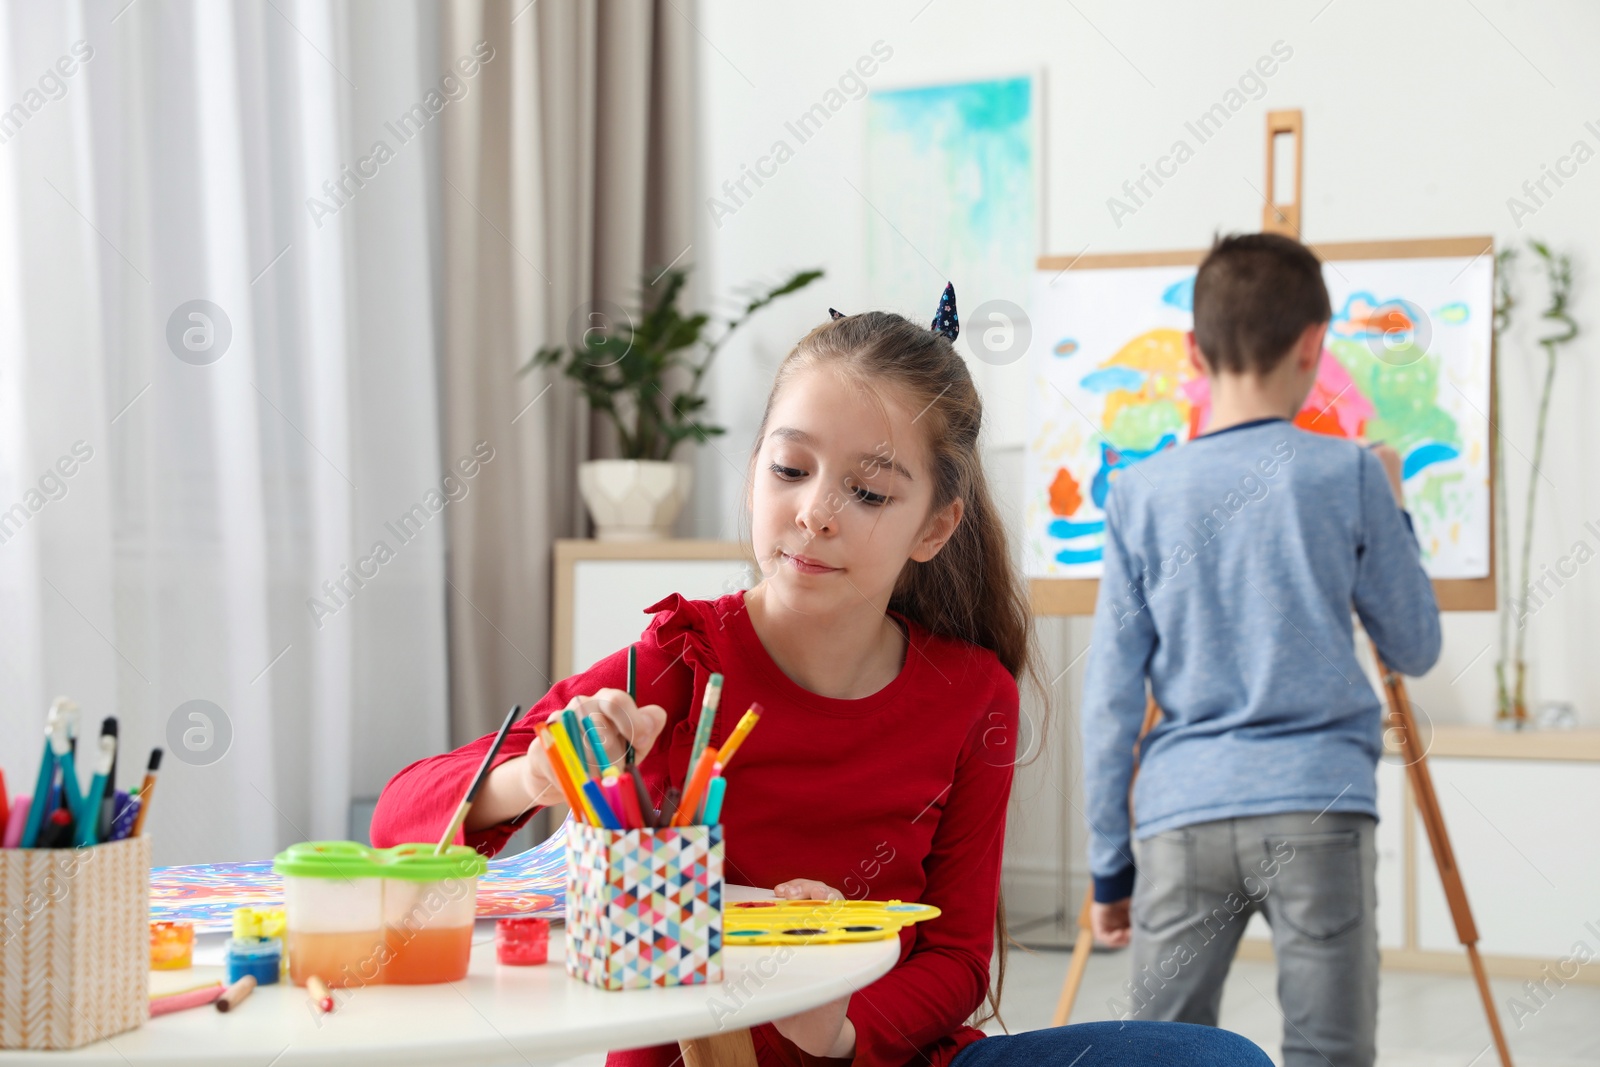 Photo of Girl painting at table and boy near easel indoors. Creative children